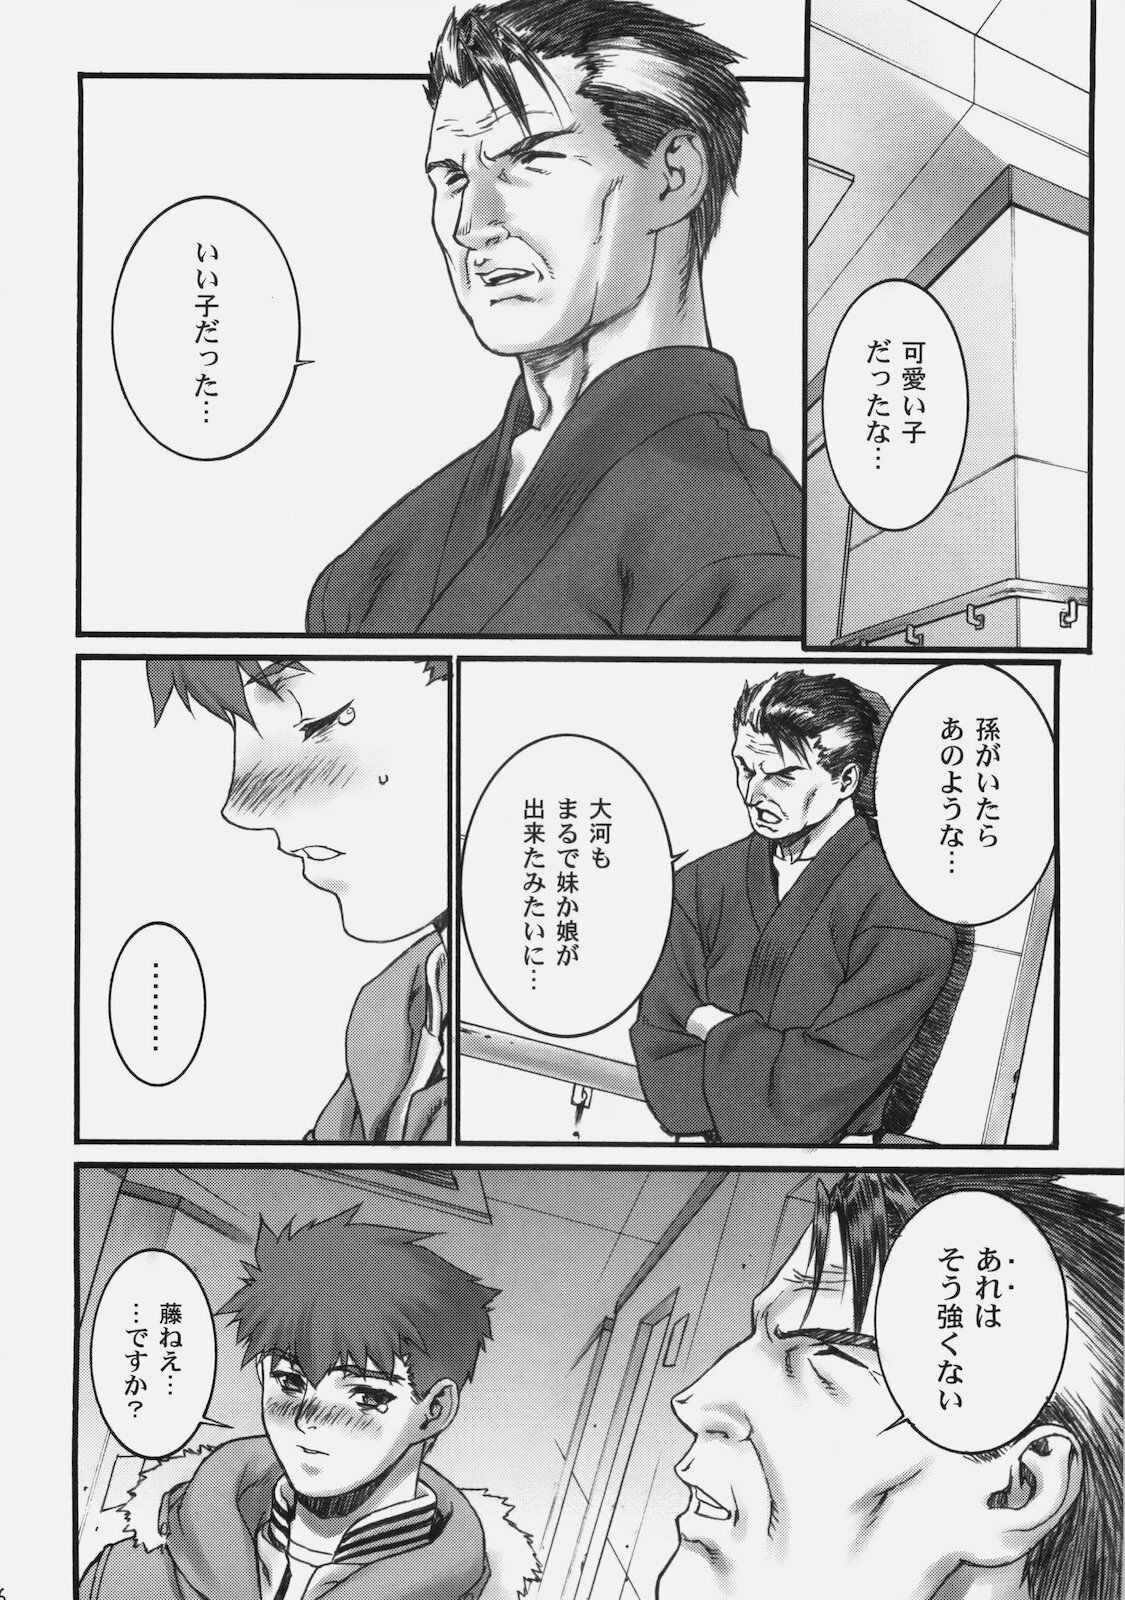 [Motchie Kingdom (Motchie)] Theater of Fate (Fate/stay night) page 33 full